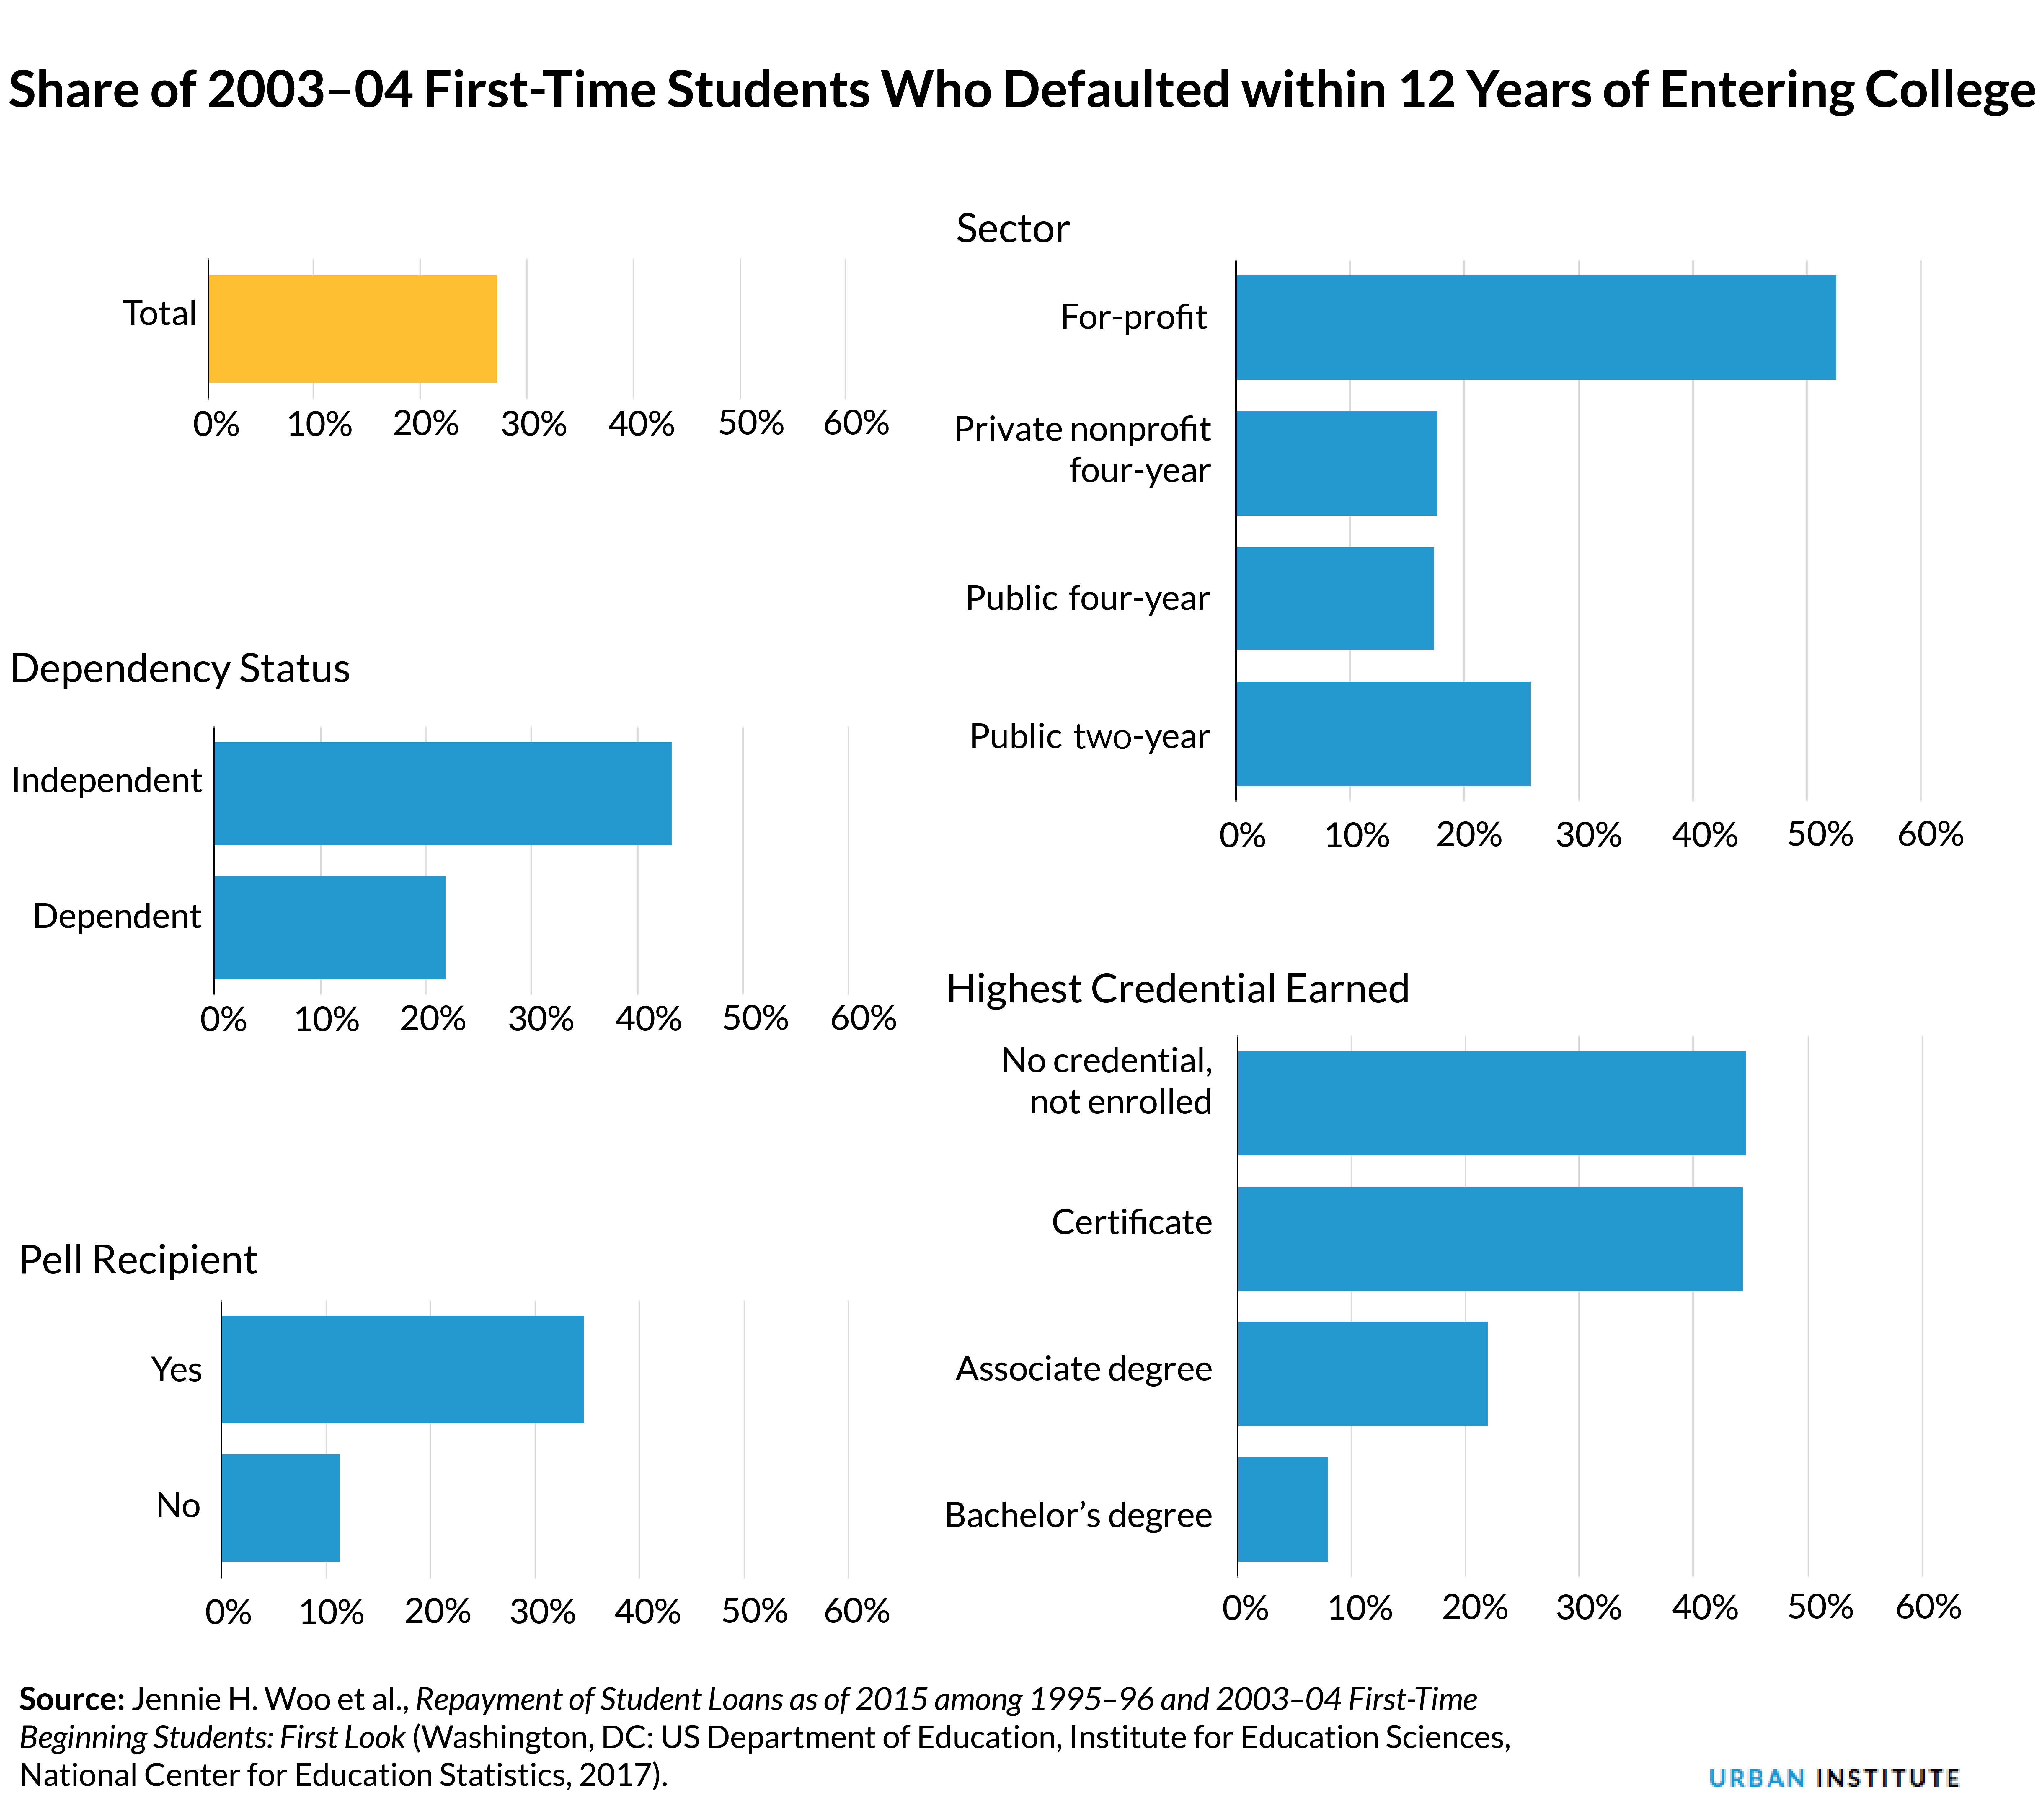 share of 2003 to 2004 first time students who defaulted within 12 years of entering college